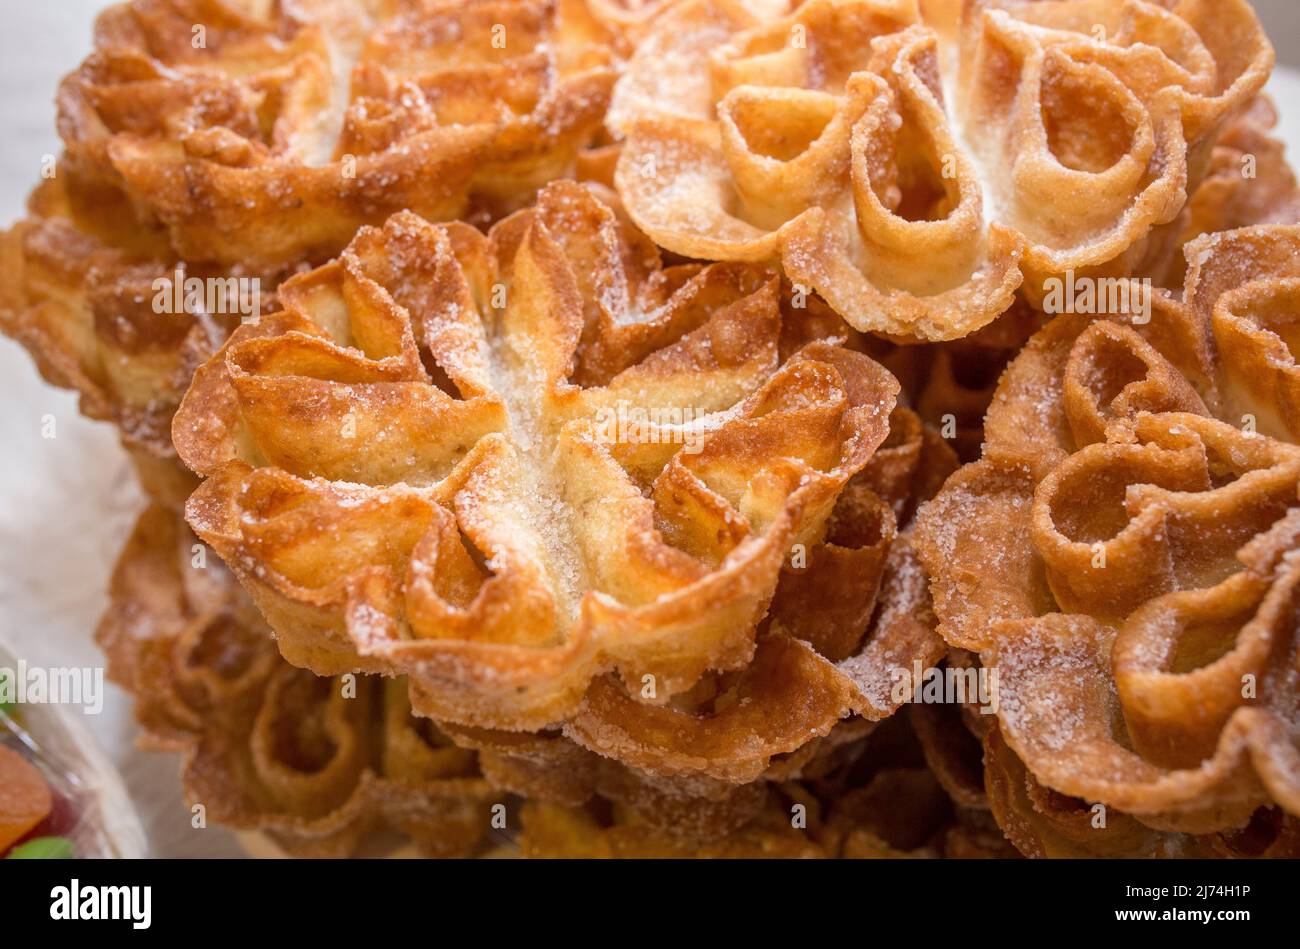 Platter full of traditional fried flores or flowers. Spanish fritter dusted with sugar Stock Photo